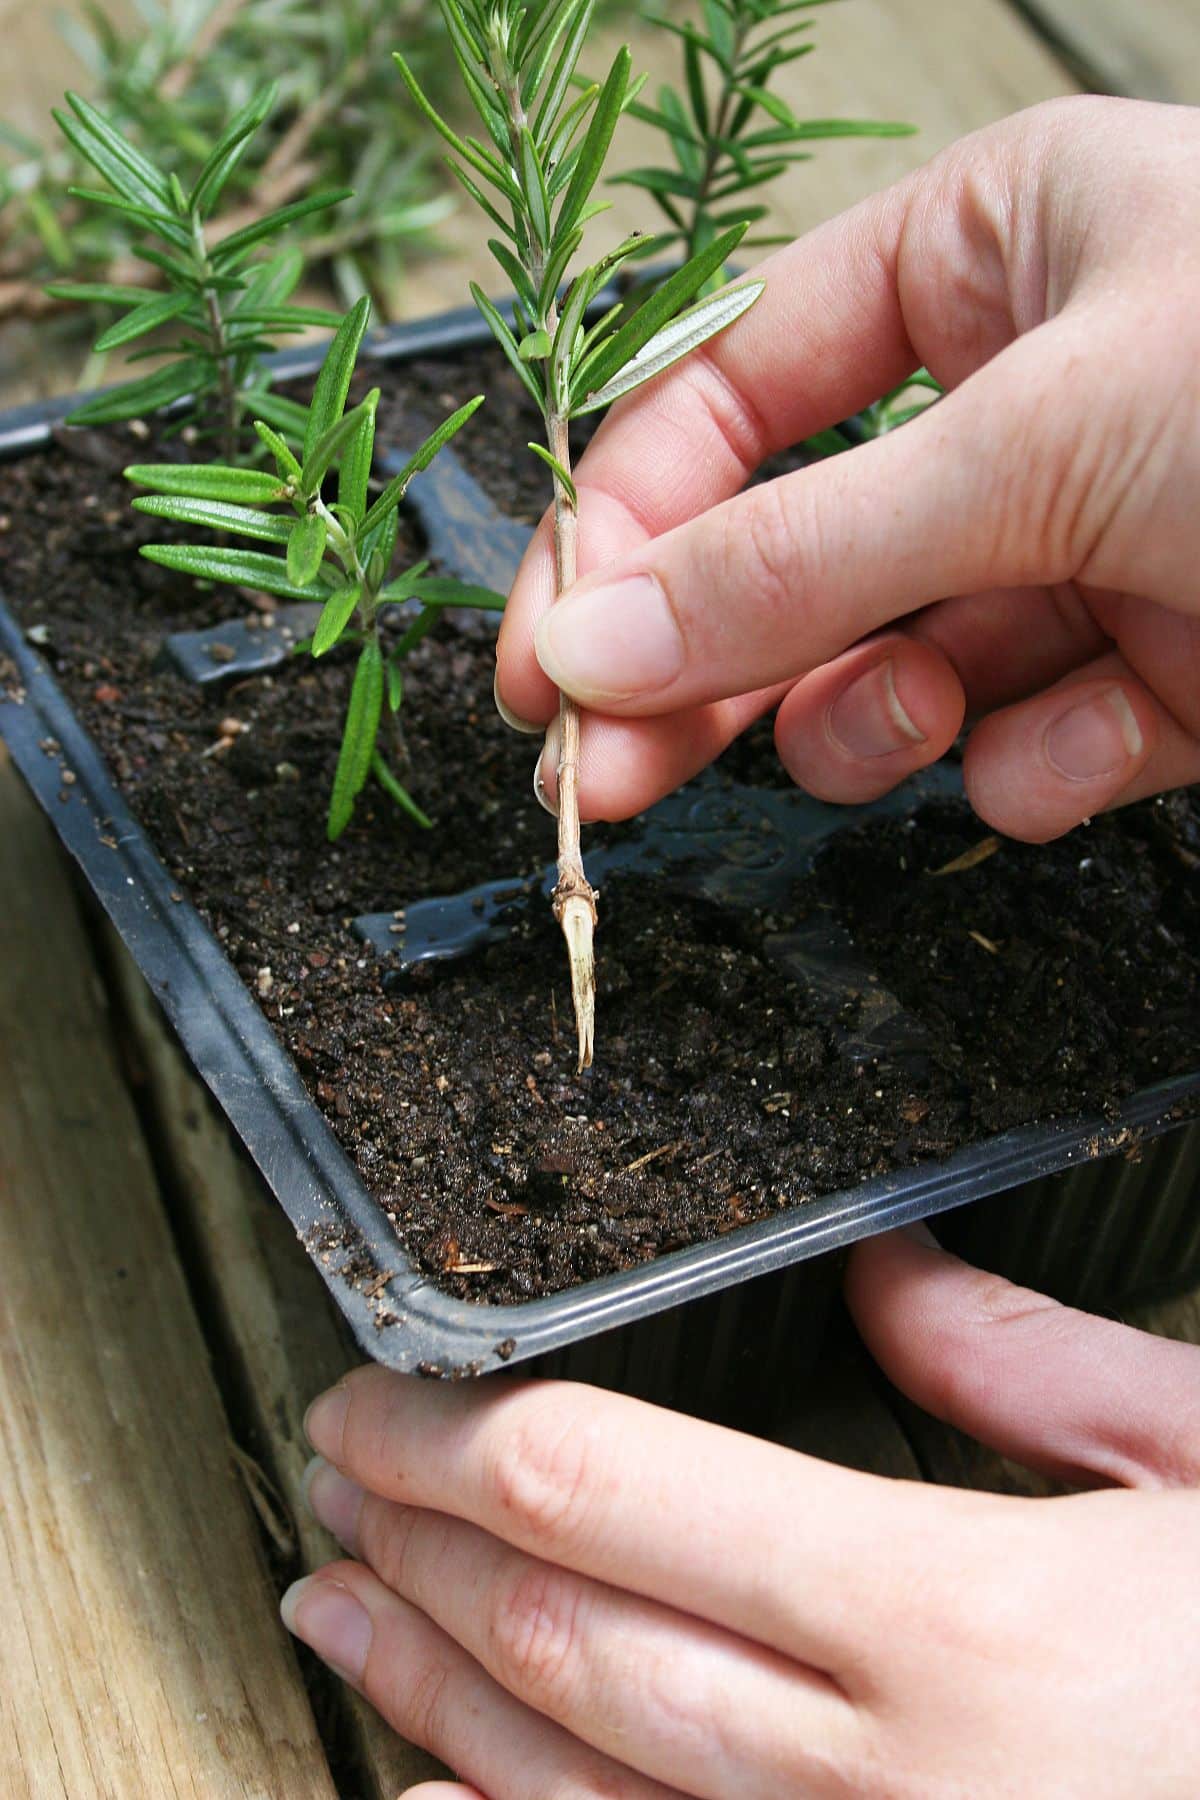 A woody stemmed herb being planted to root in soil